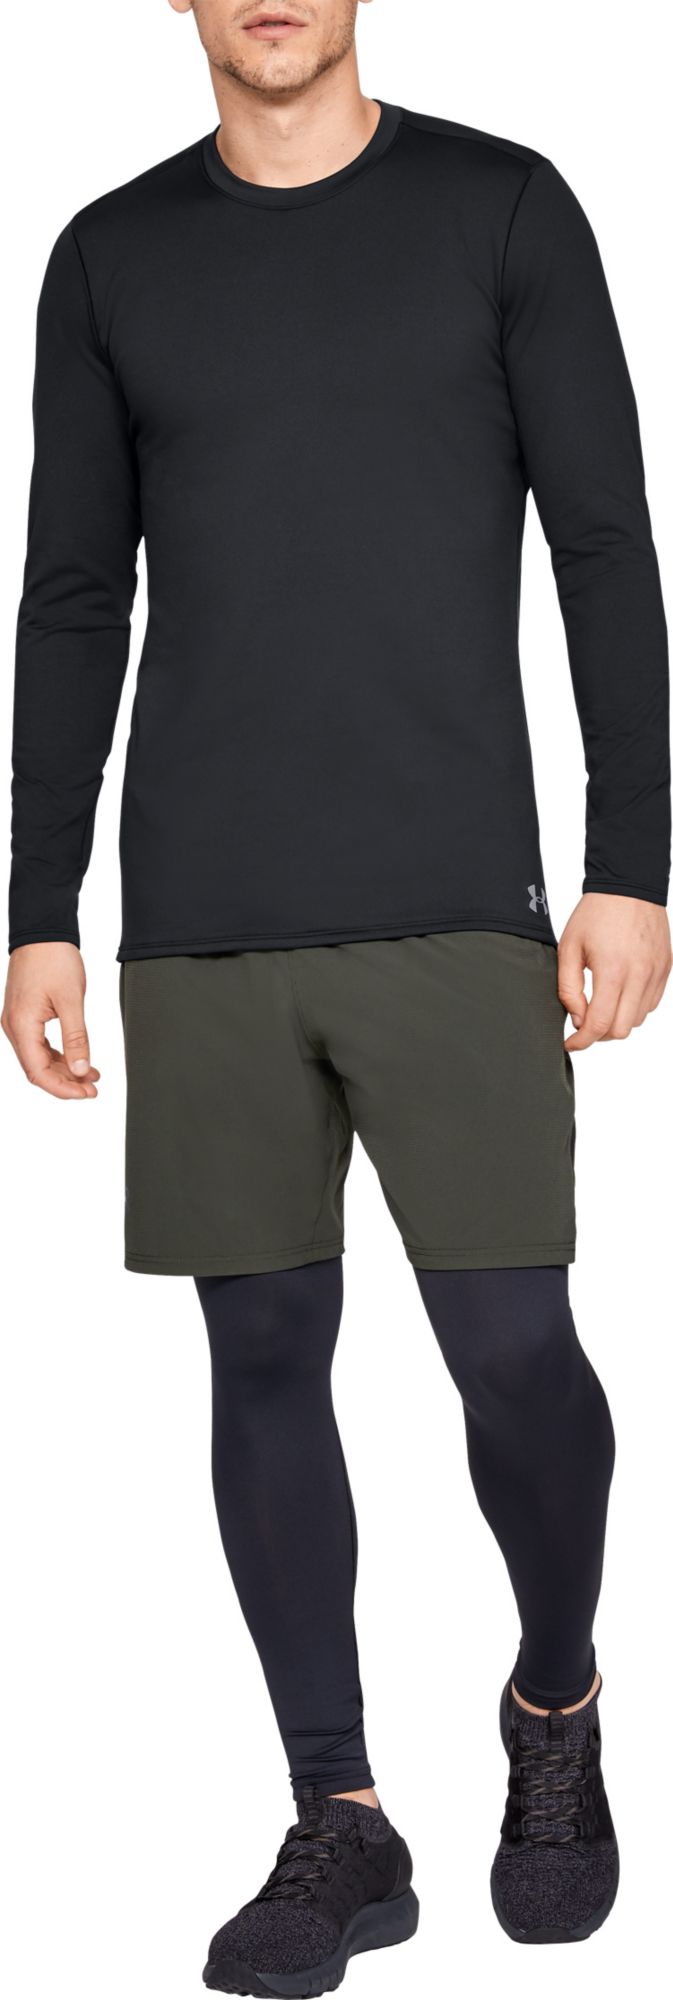 under armour men's coldgear fitted hooded long sleeve shirt